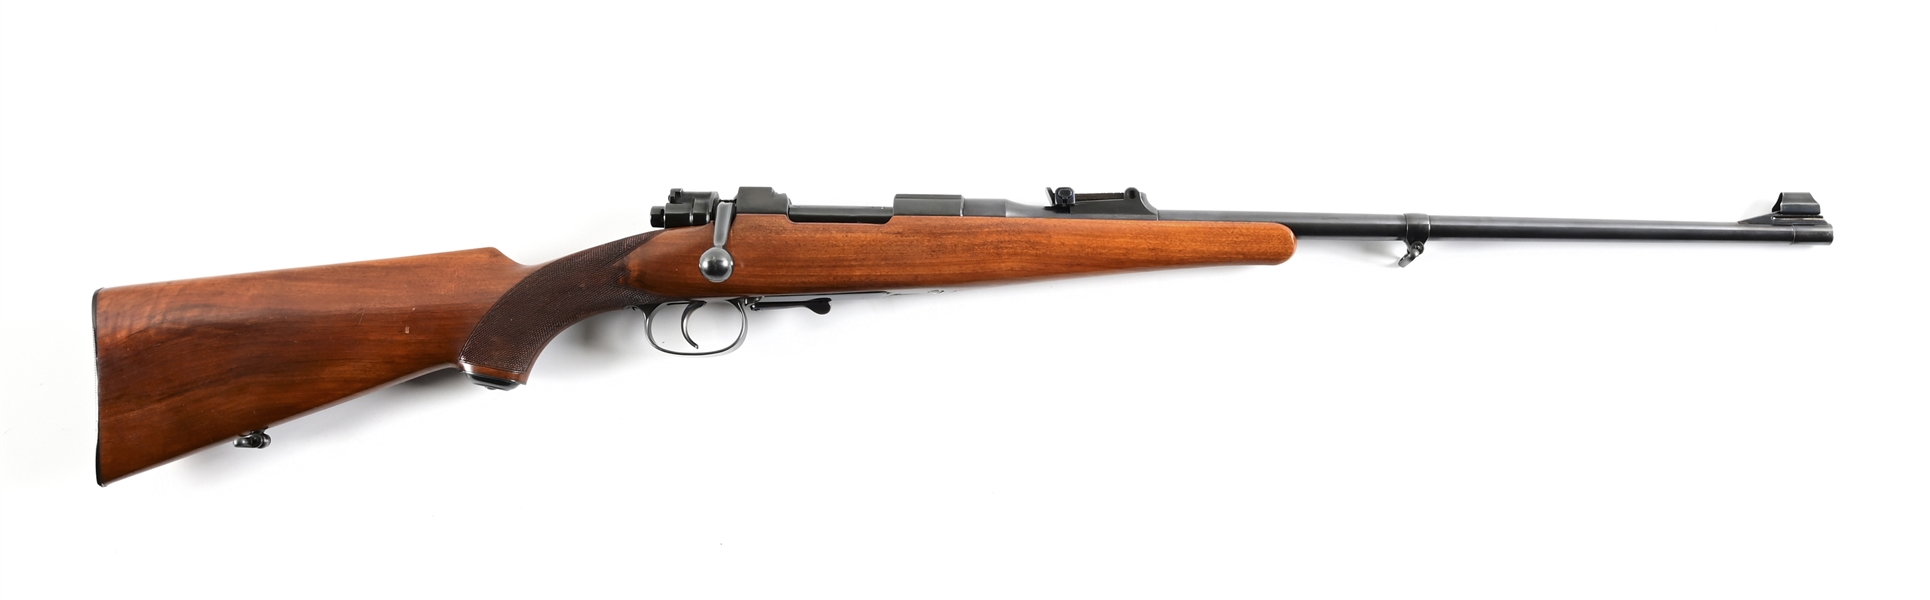 (C) SCARCE PRE-WAR MAUSER MODEL B BOLT ACTION SPORTING RIFLE IN .250-3000.